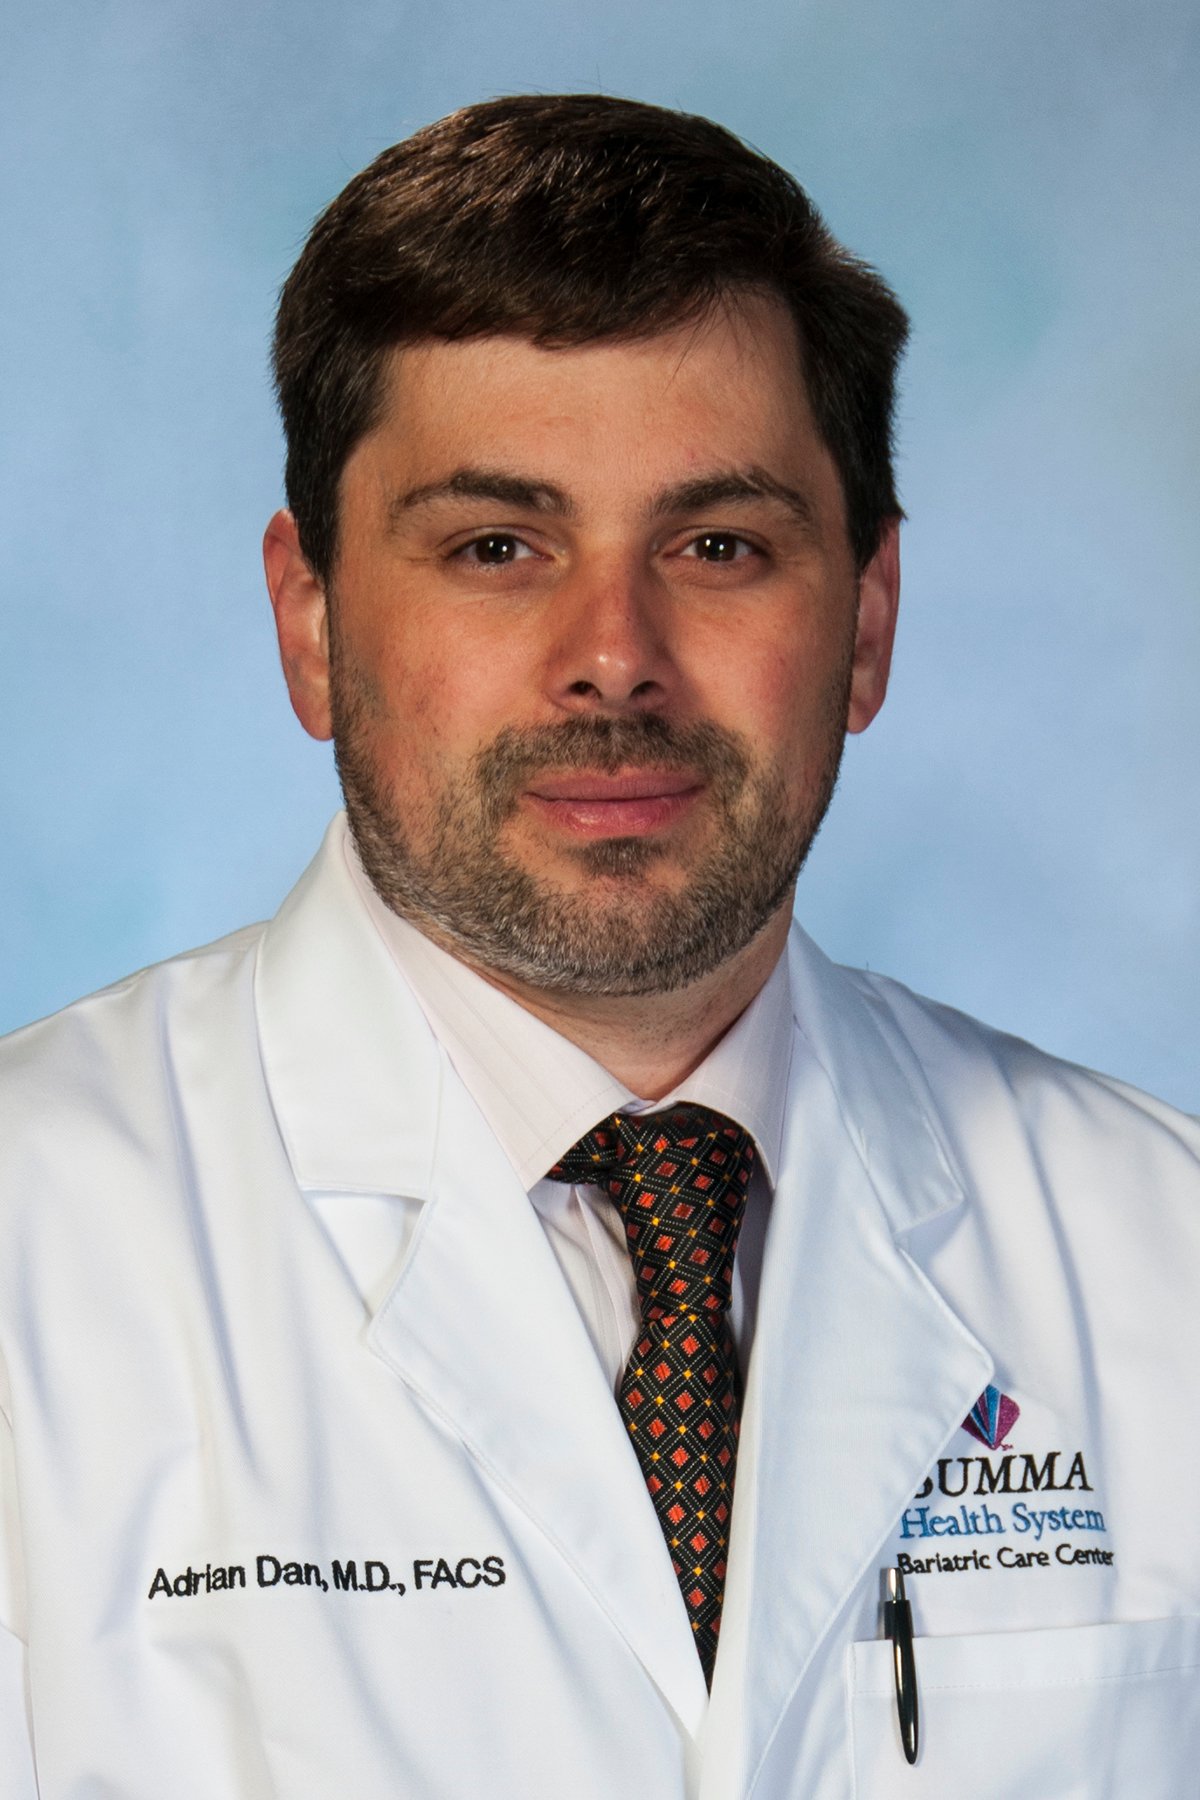 #Bariatric Surgeon - Weight Management Center & Fellowship Director @SummaHealth. Assoc.Professor @NEOMED. Director and Founder of the @NationalSurgery   Review